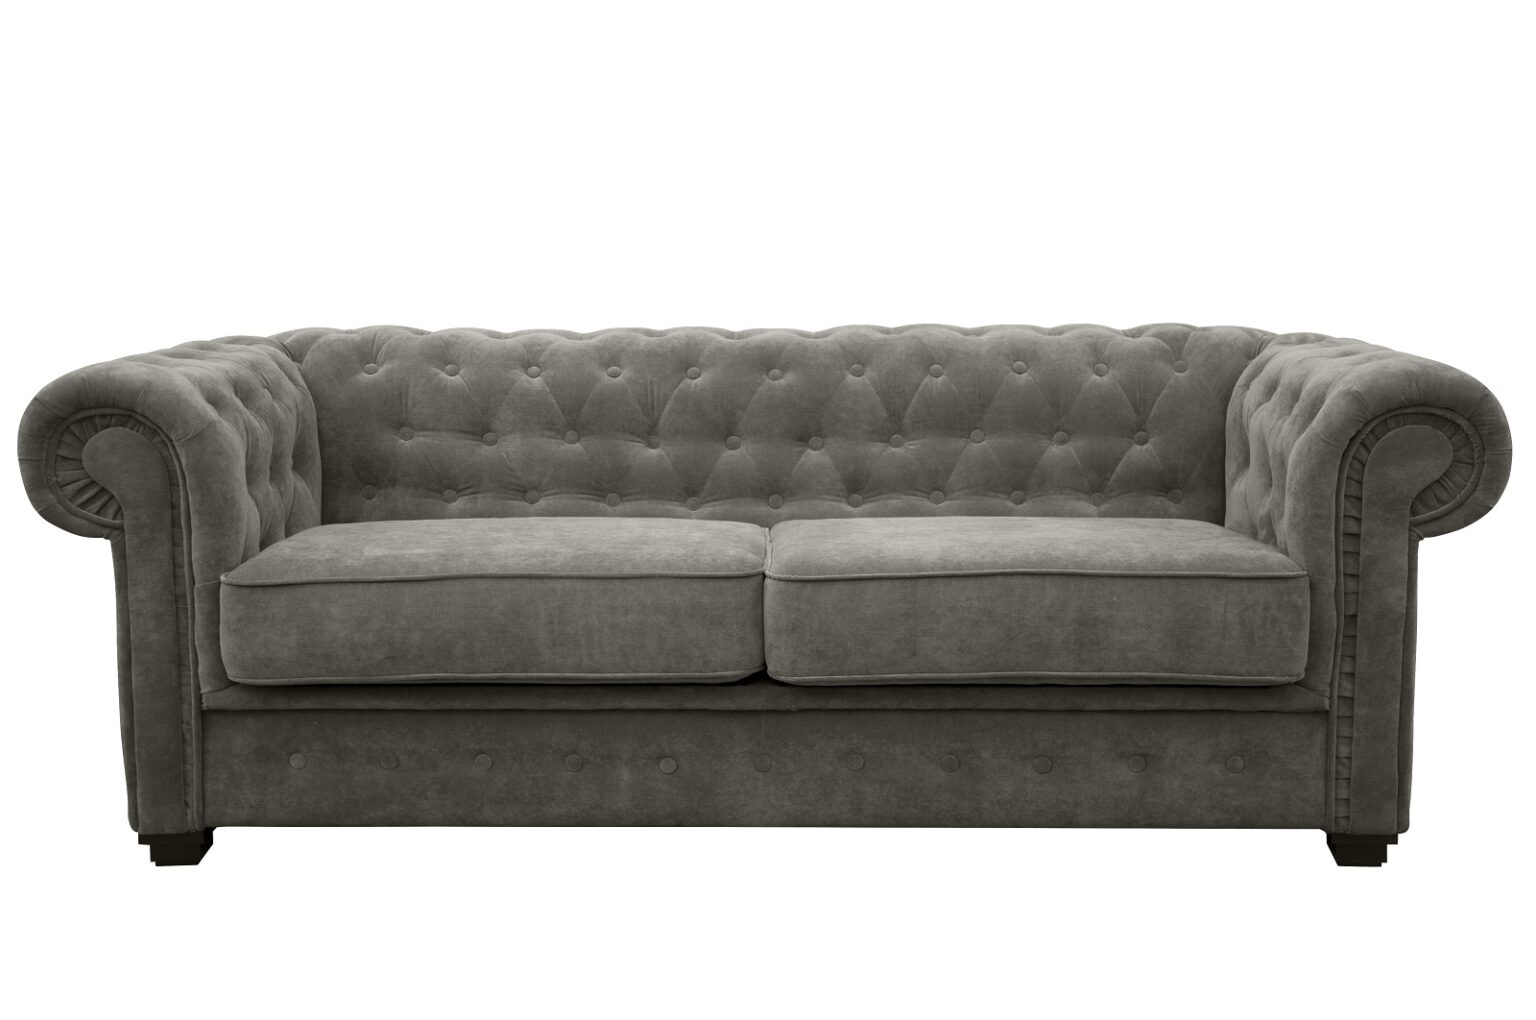 Imperial 2 Seater Fabric Sofa Bed | Sofa-Place.co.uk